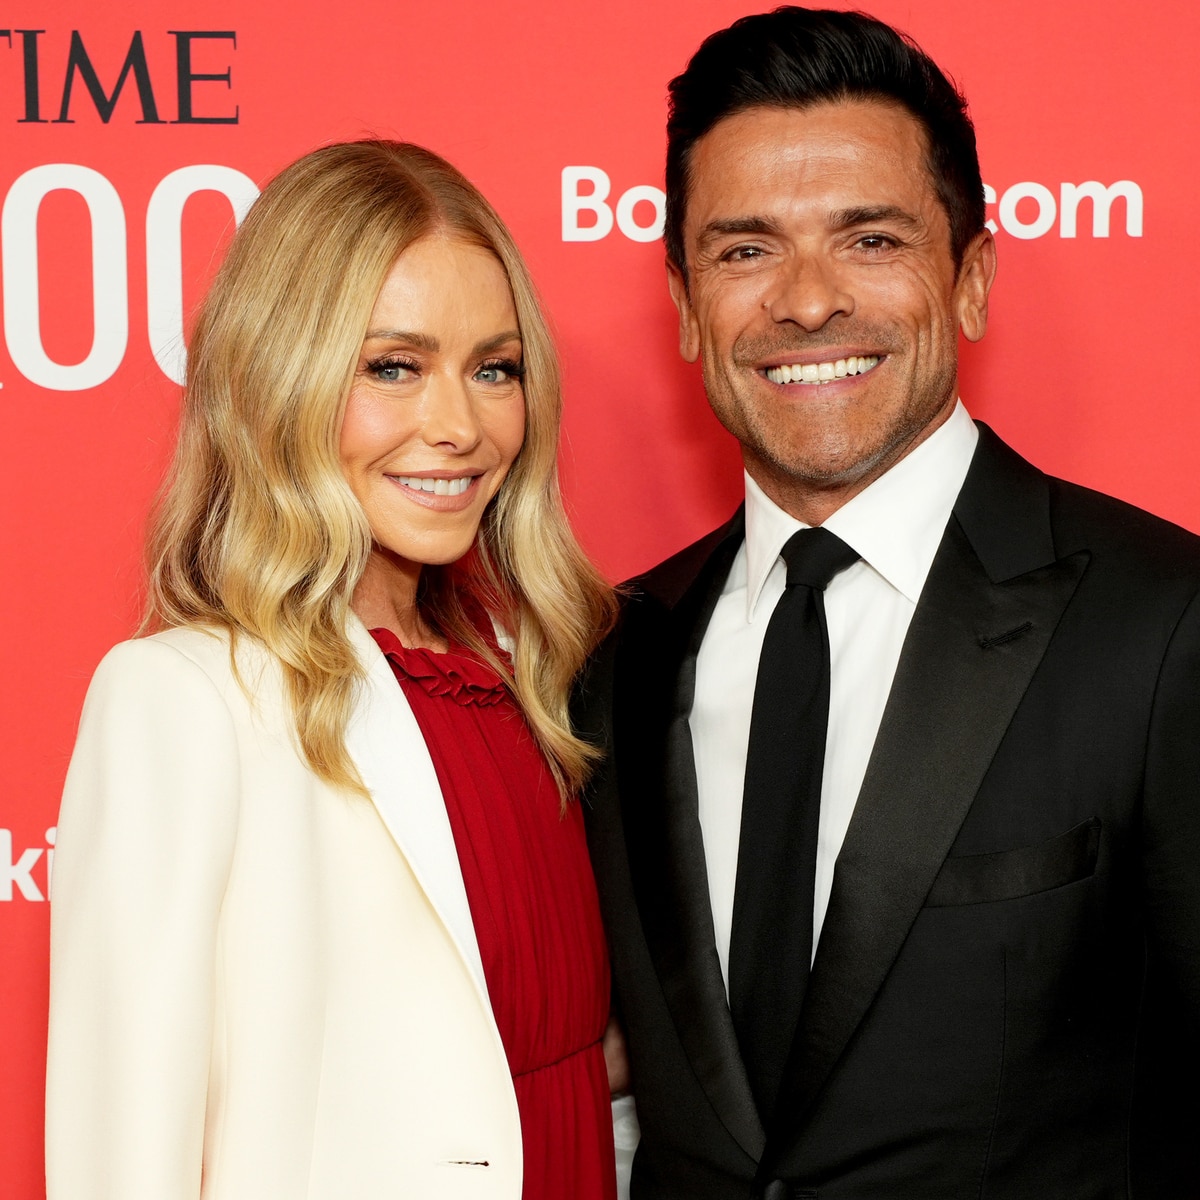 Why Working Together Changed Kelly Ripa & Mark Consuelos’ Romance